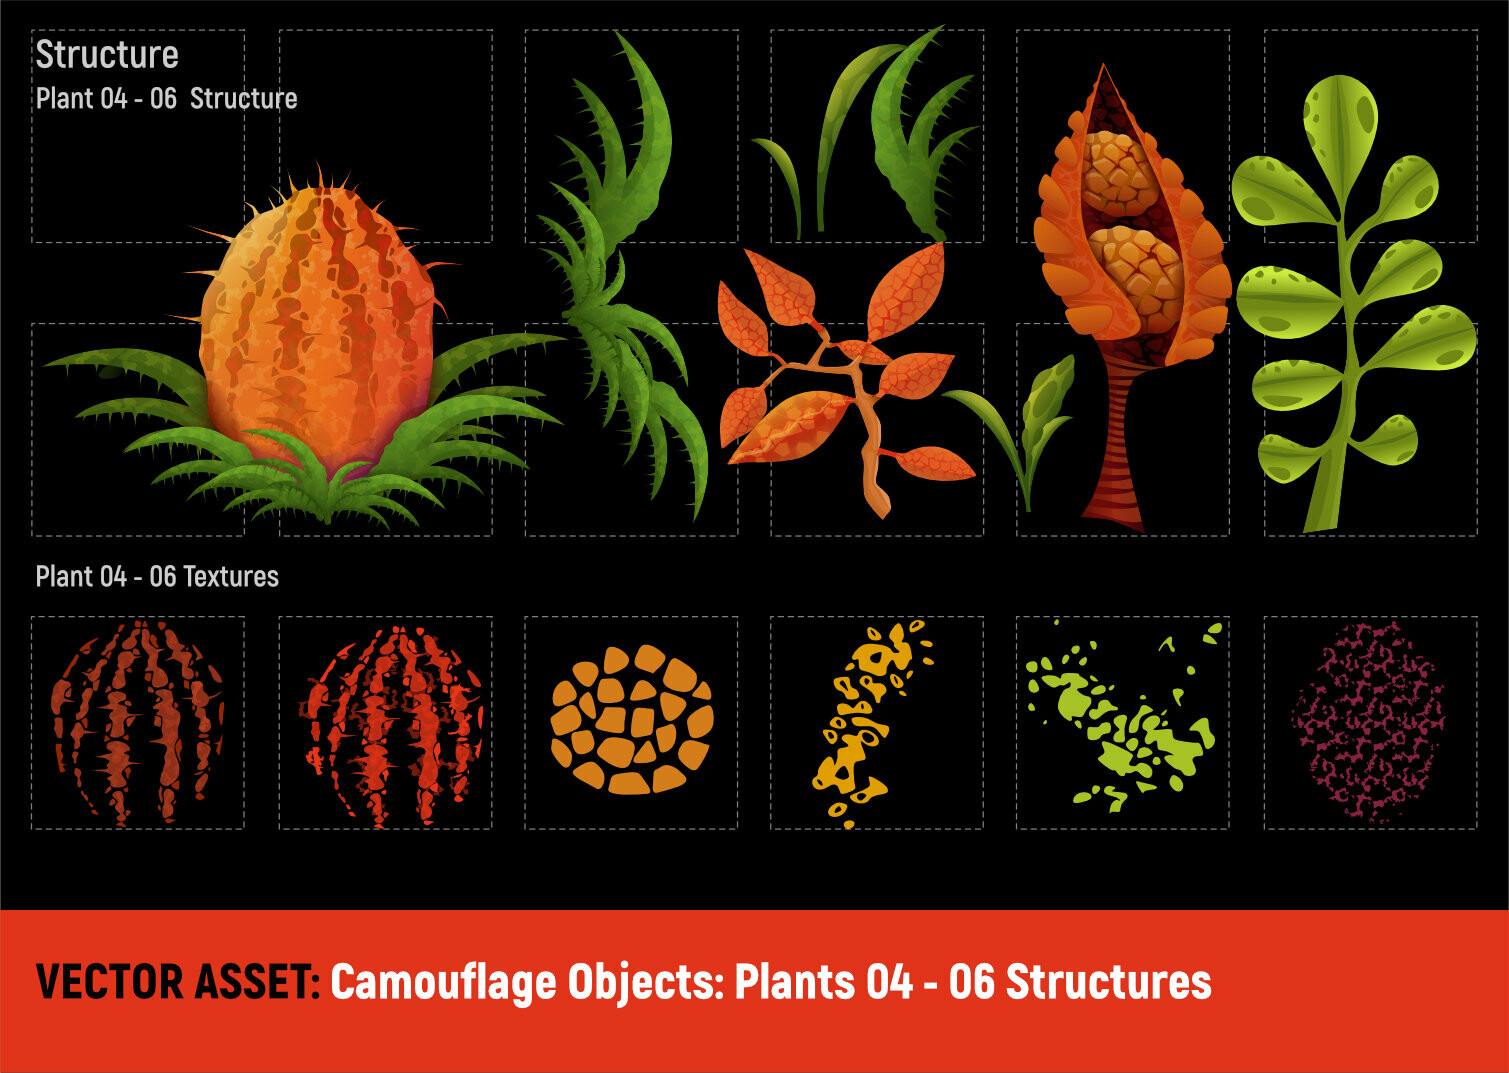 Vector Assets
Camouflage I Objects: Plants 04 Structures